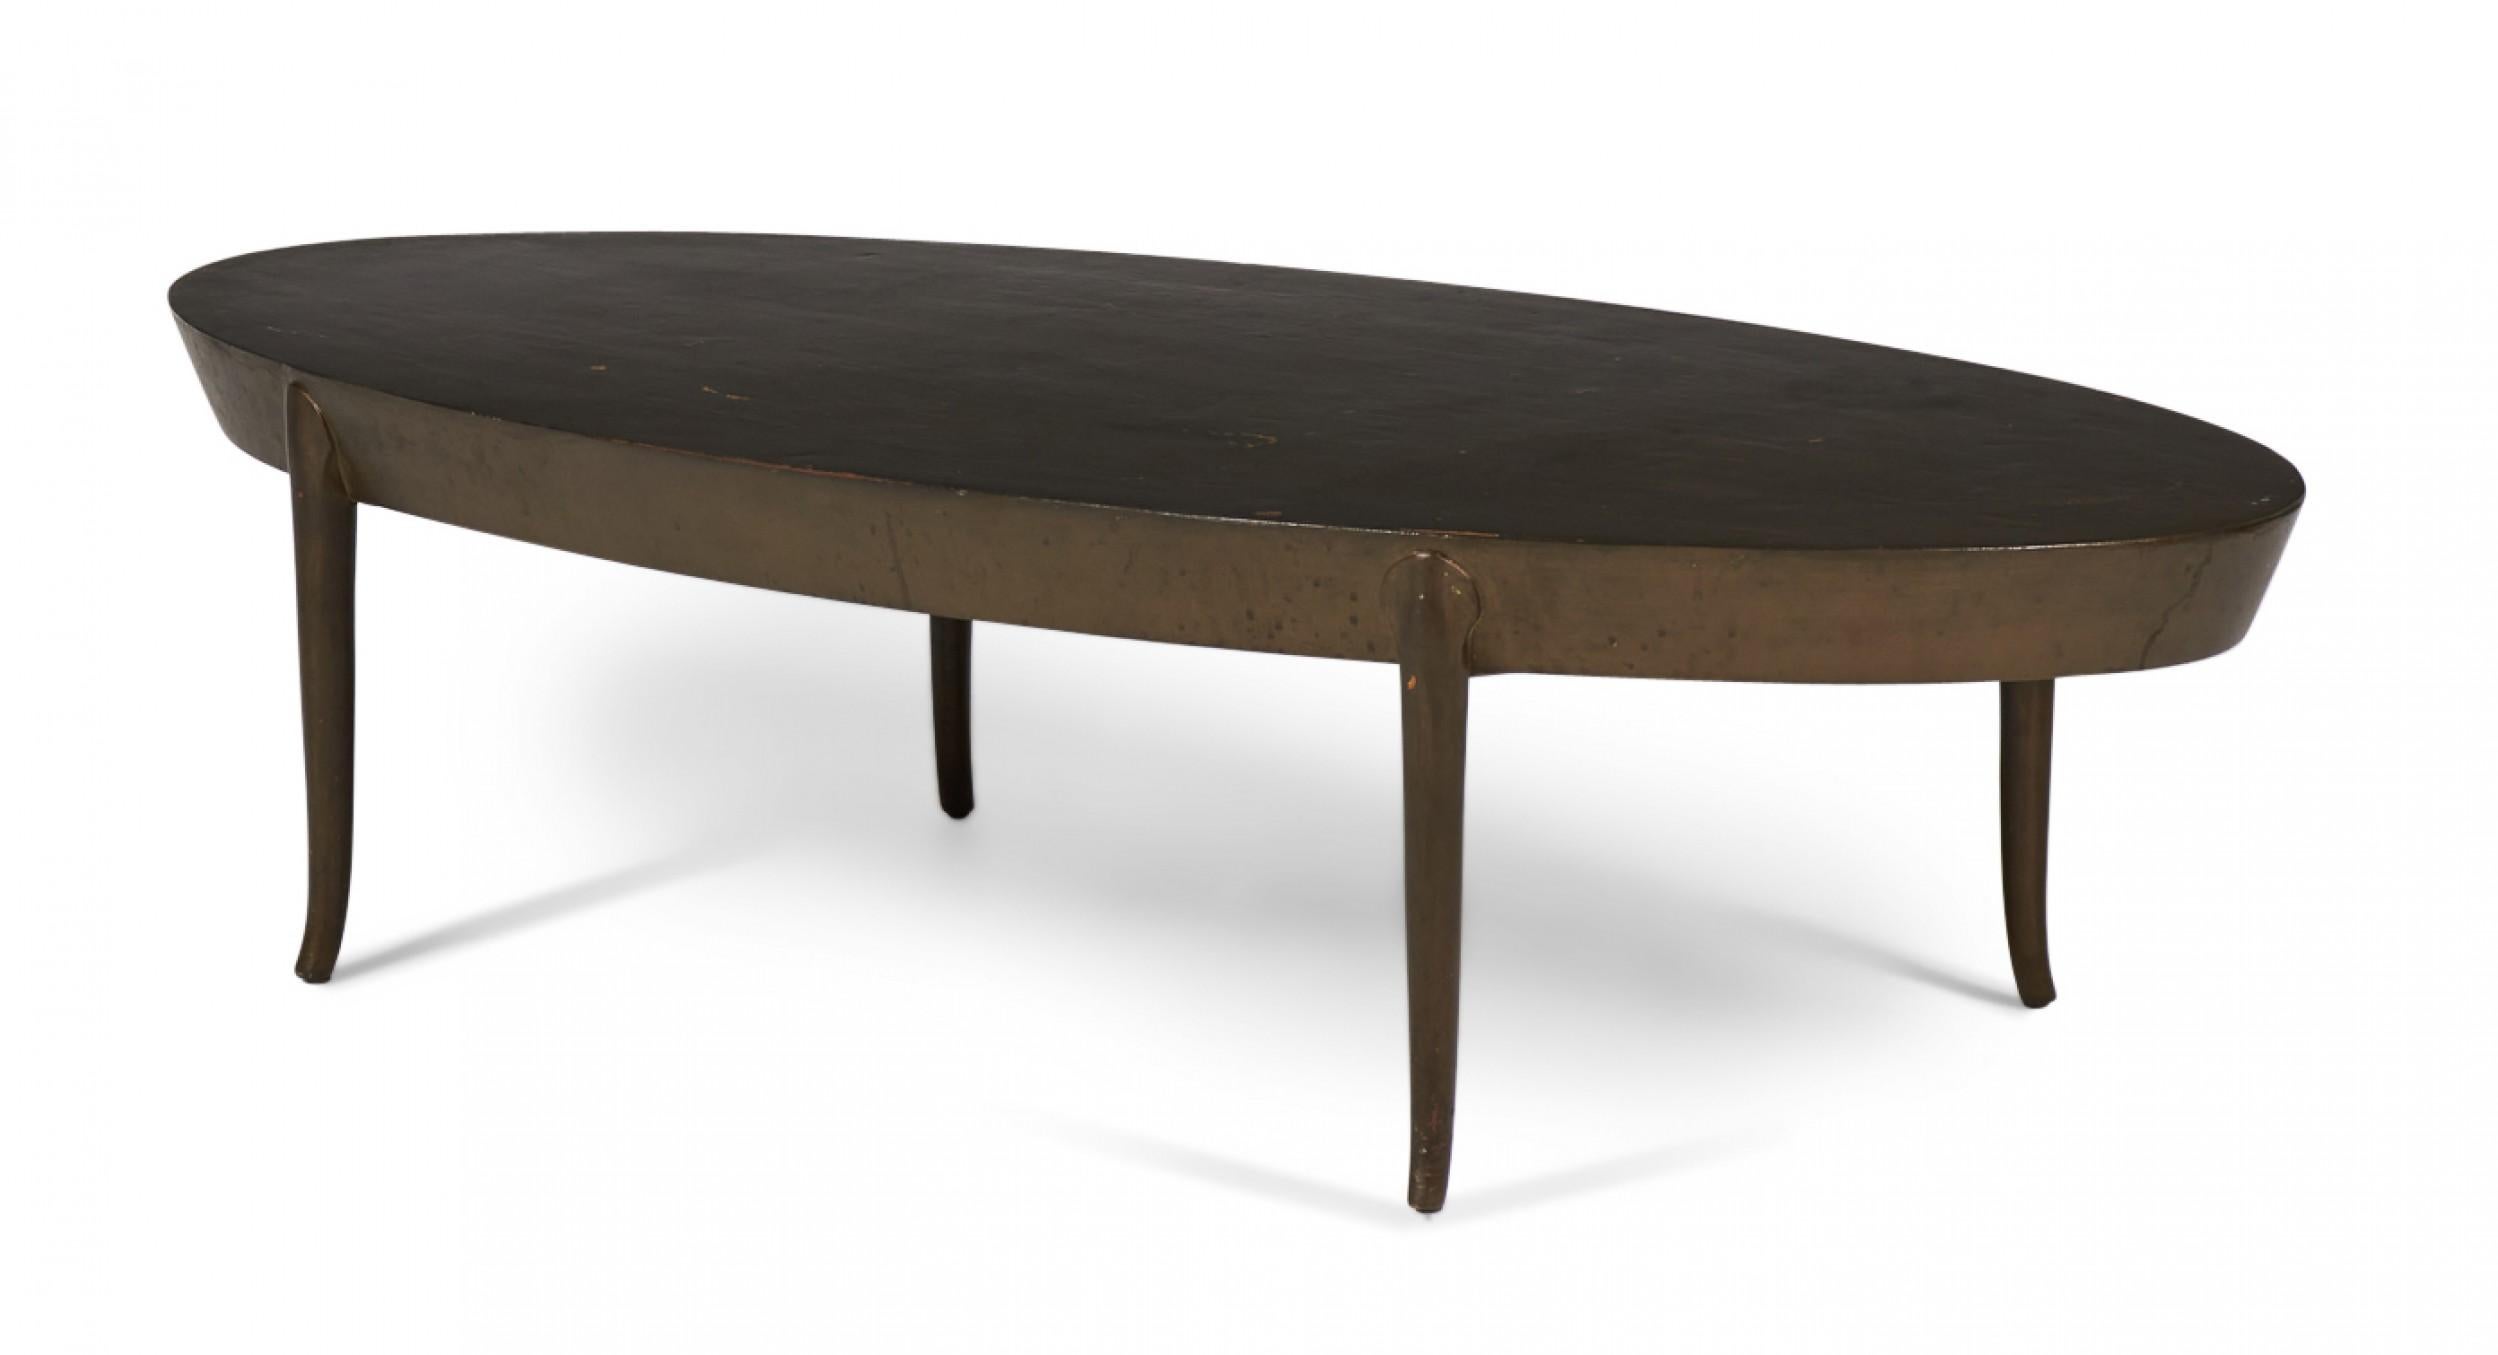 American Mid-Century oval wooden cocktail / coffee table with a thick tapered top resting on four round legs with gently curved feet. (T.H. ROBSJOHN-GIBBINGS)
